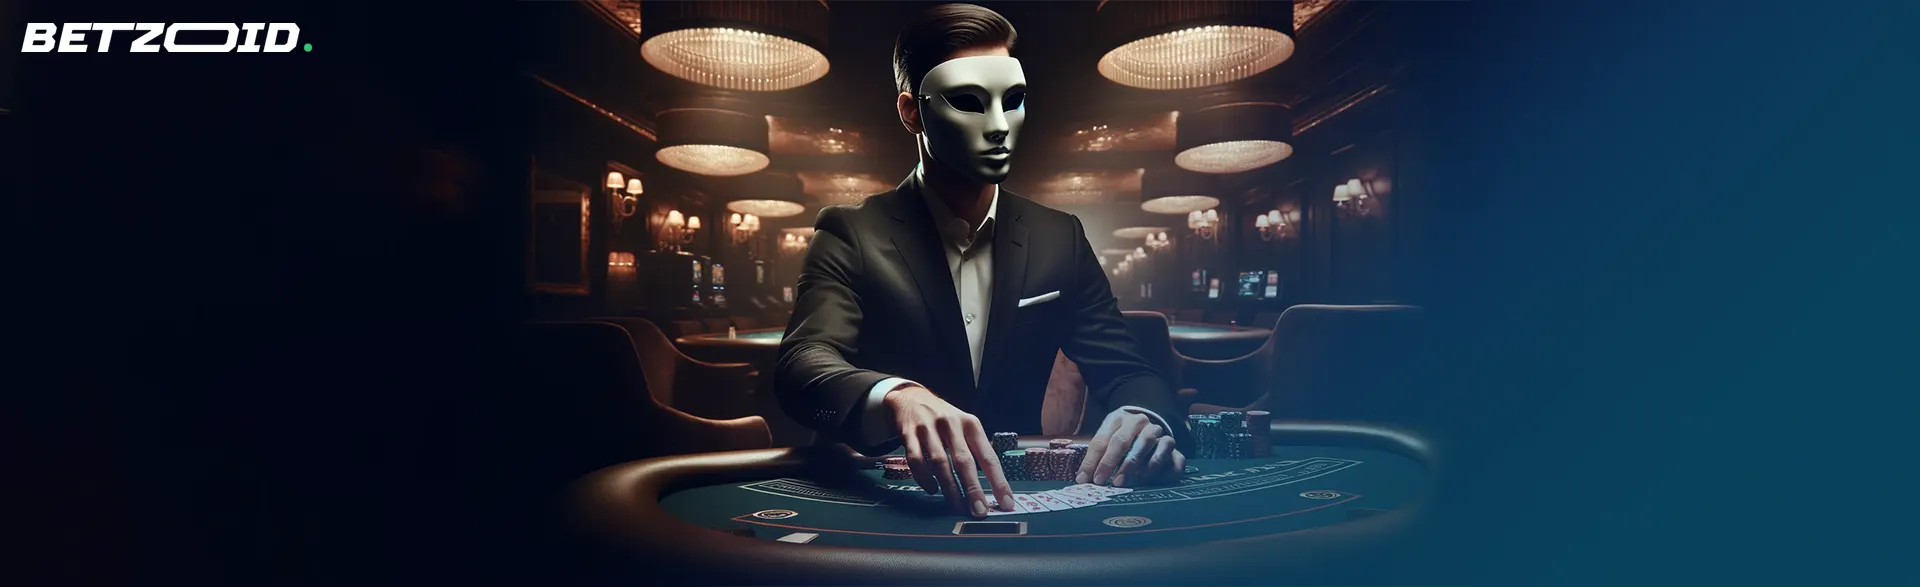 Masked player in anonymous online casinos.